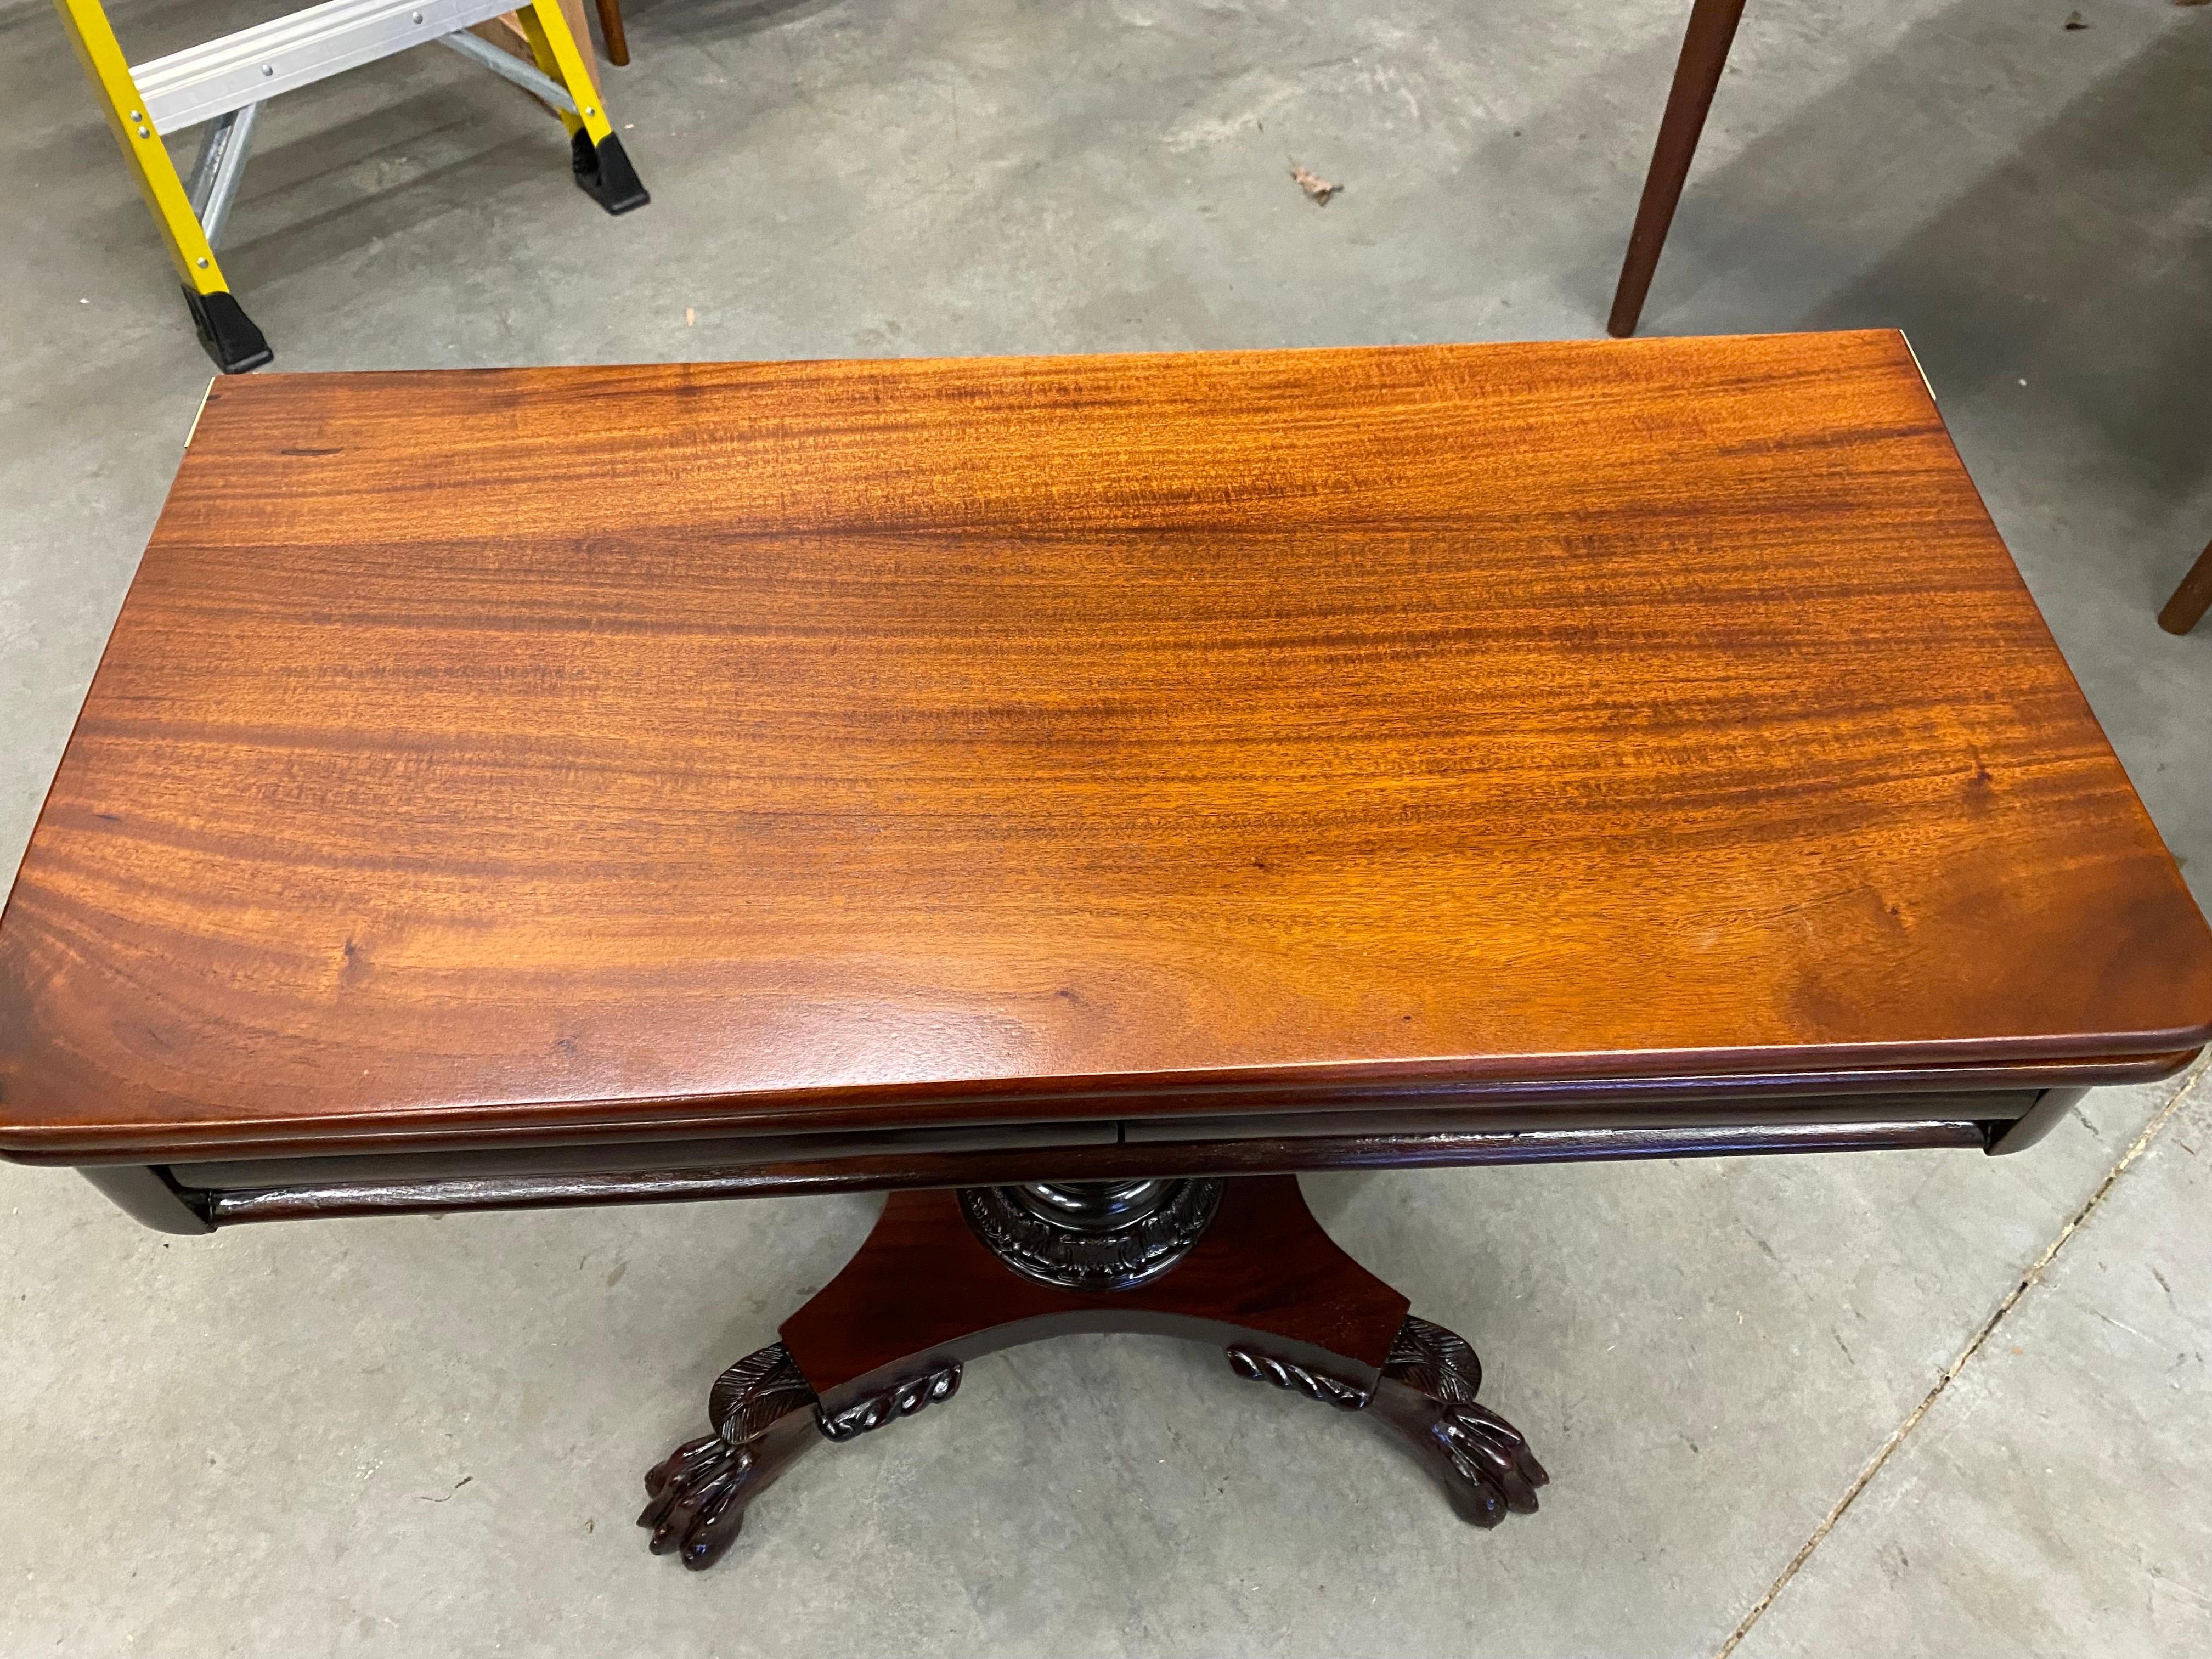 American Classical mahogany card table, second quarter 19th century, having a single hinged fold top with acanthus carved support ending in paw feet. Solid hand carved mahogany with the finish restored. 

Dimensions: height closed 28 1/4in; width